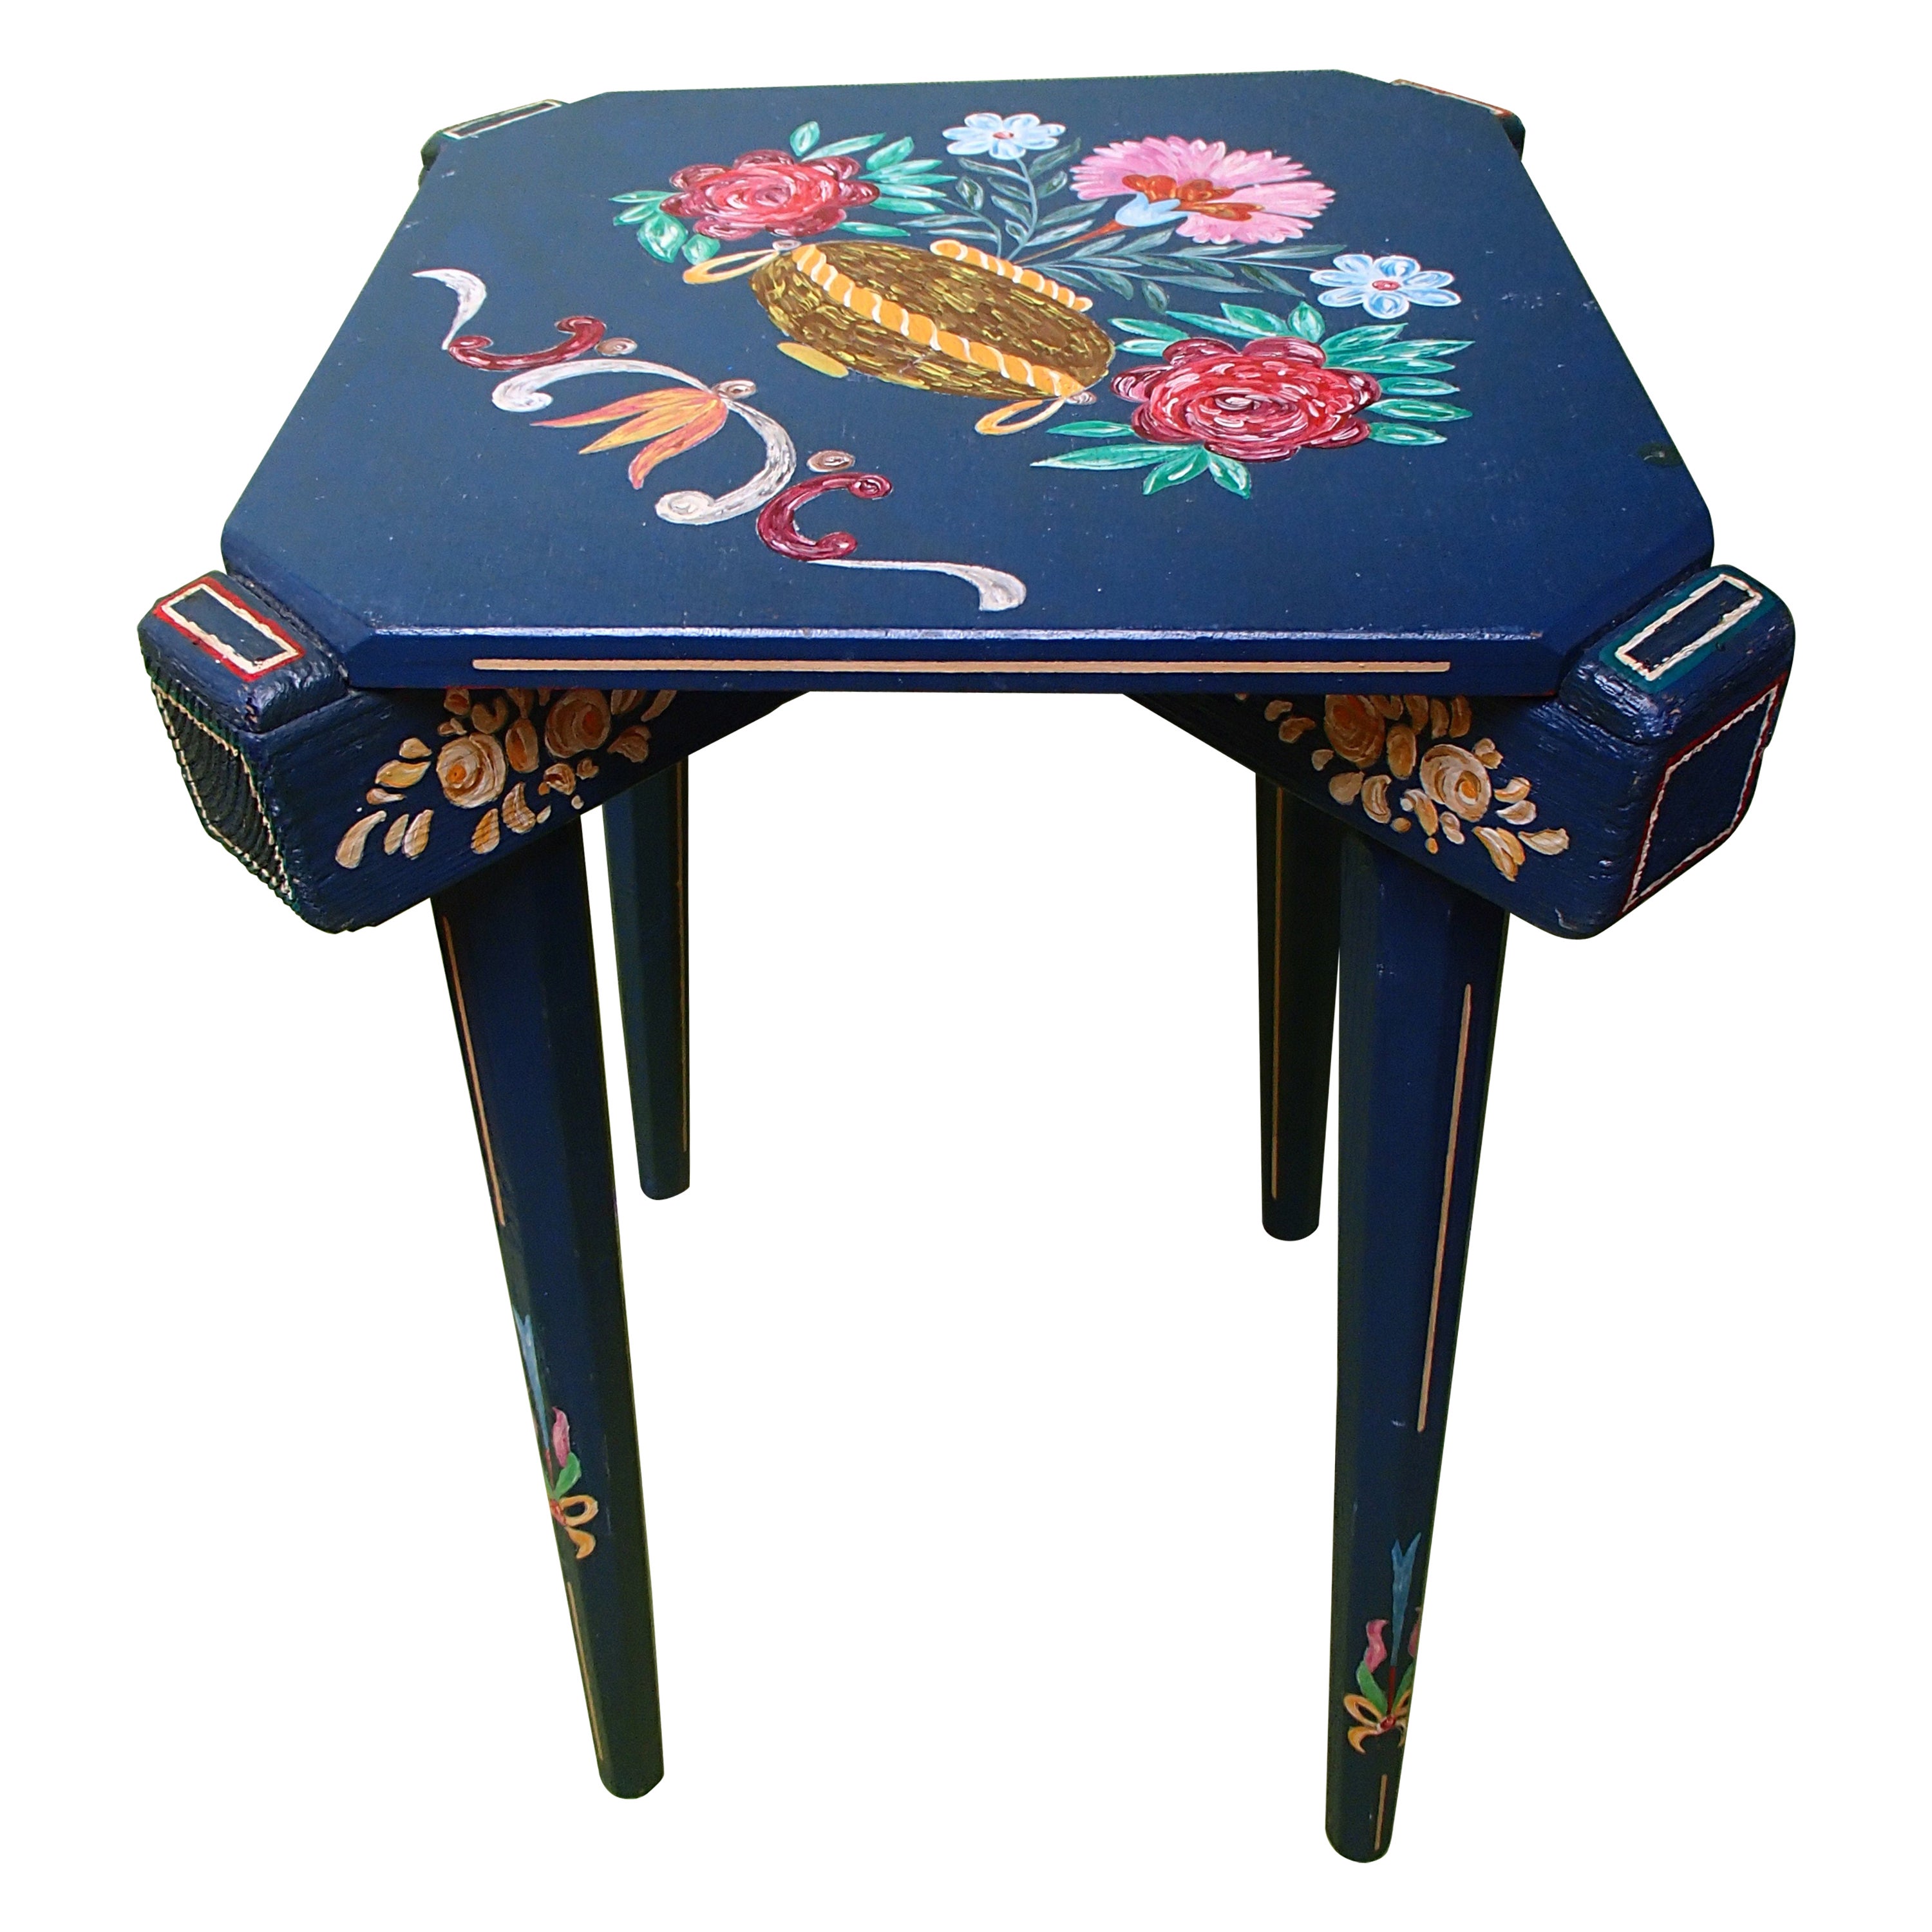 19th century folk art blue wooden stool or side table hand painted flowers